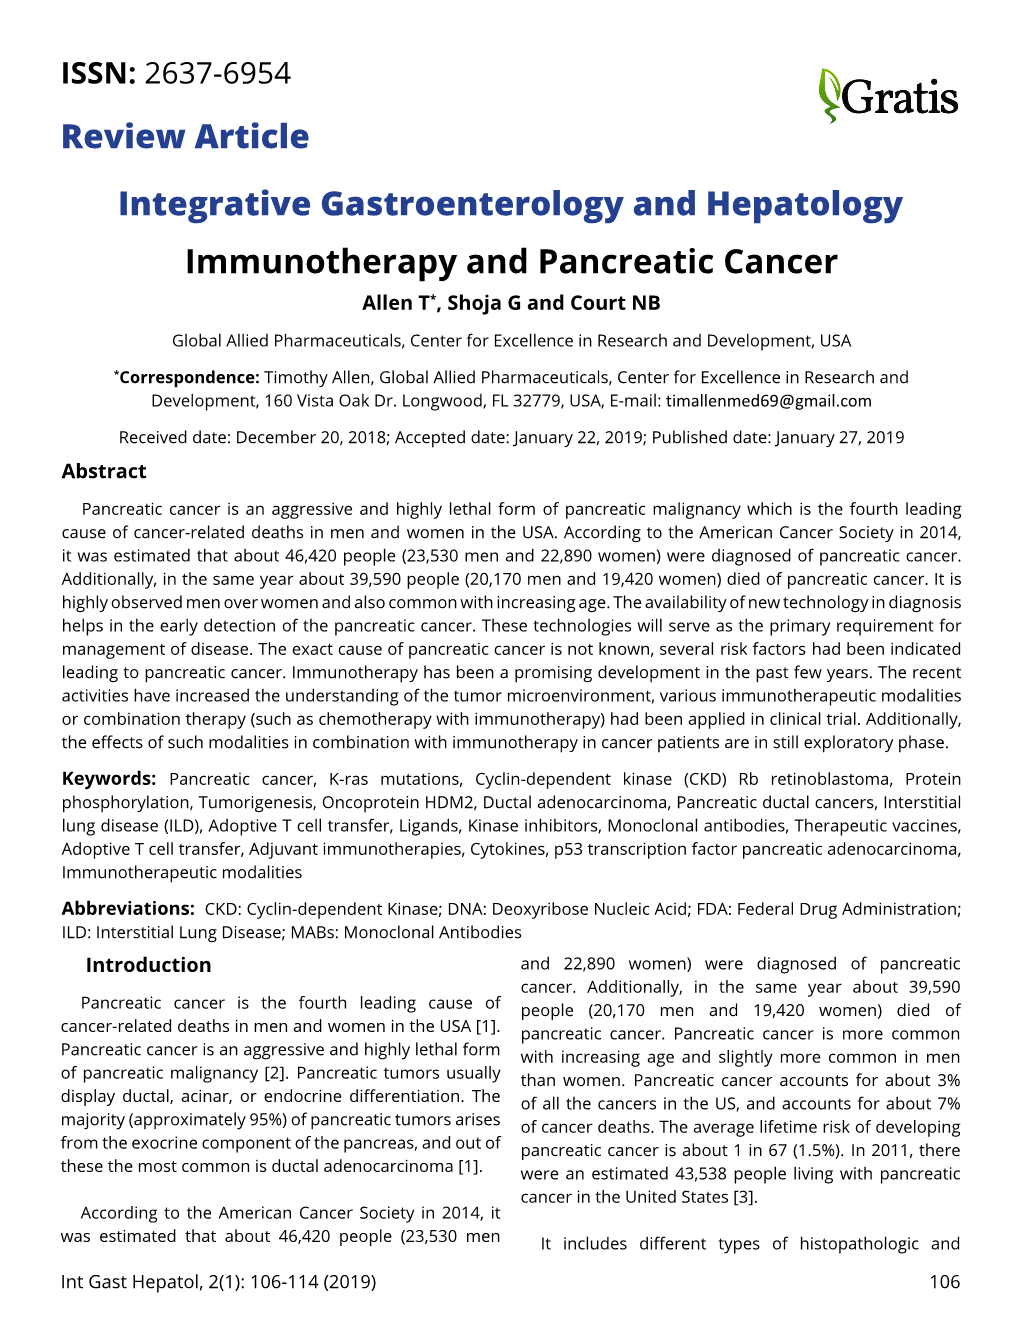 Integrative Gastroenterology and Hepatology Immunotherapy and Pancreatic Cancer Allen T*, Shoja G and Court NB